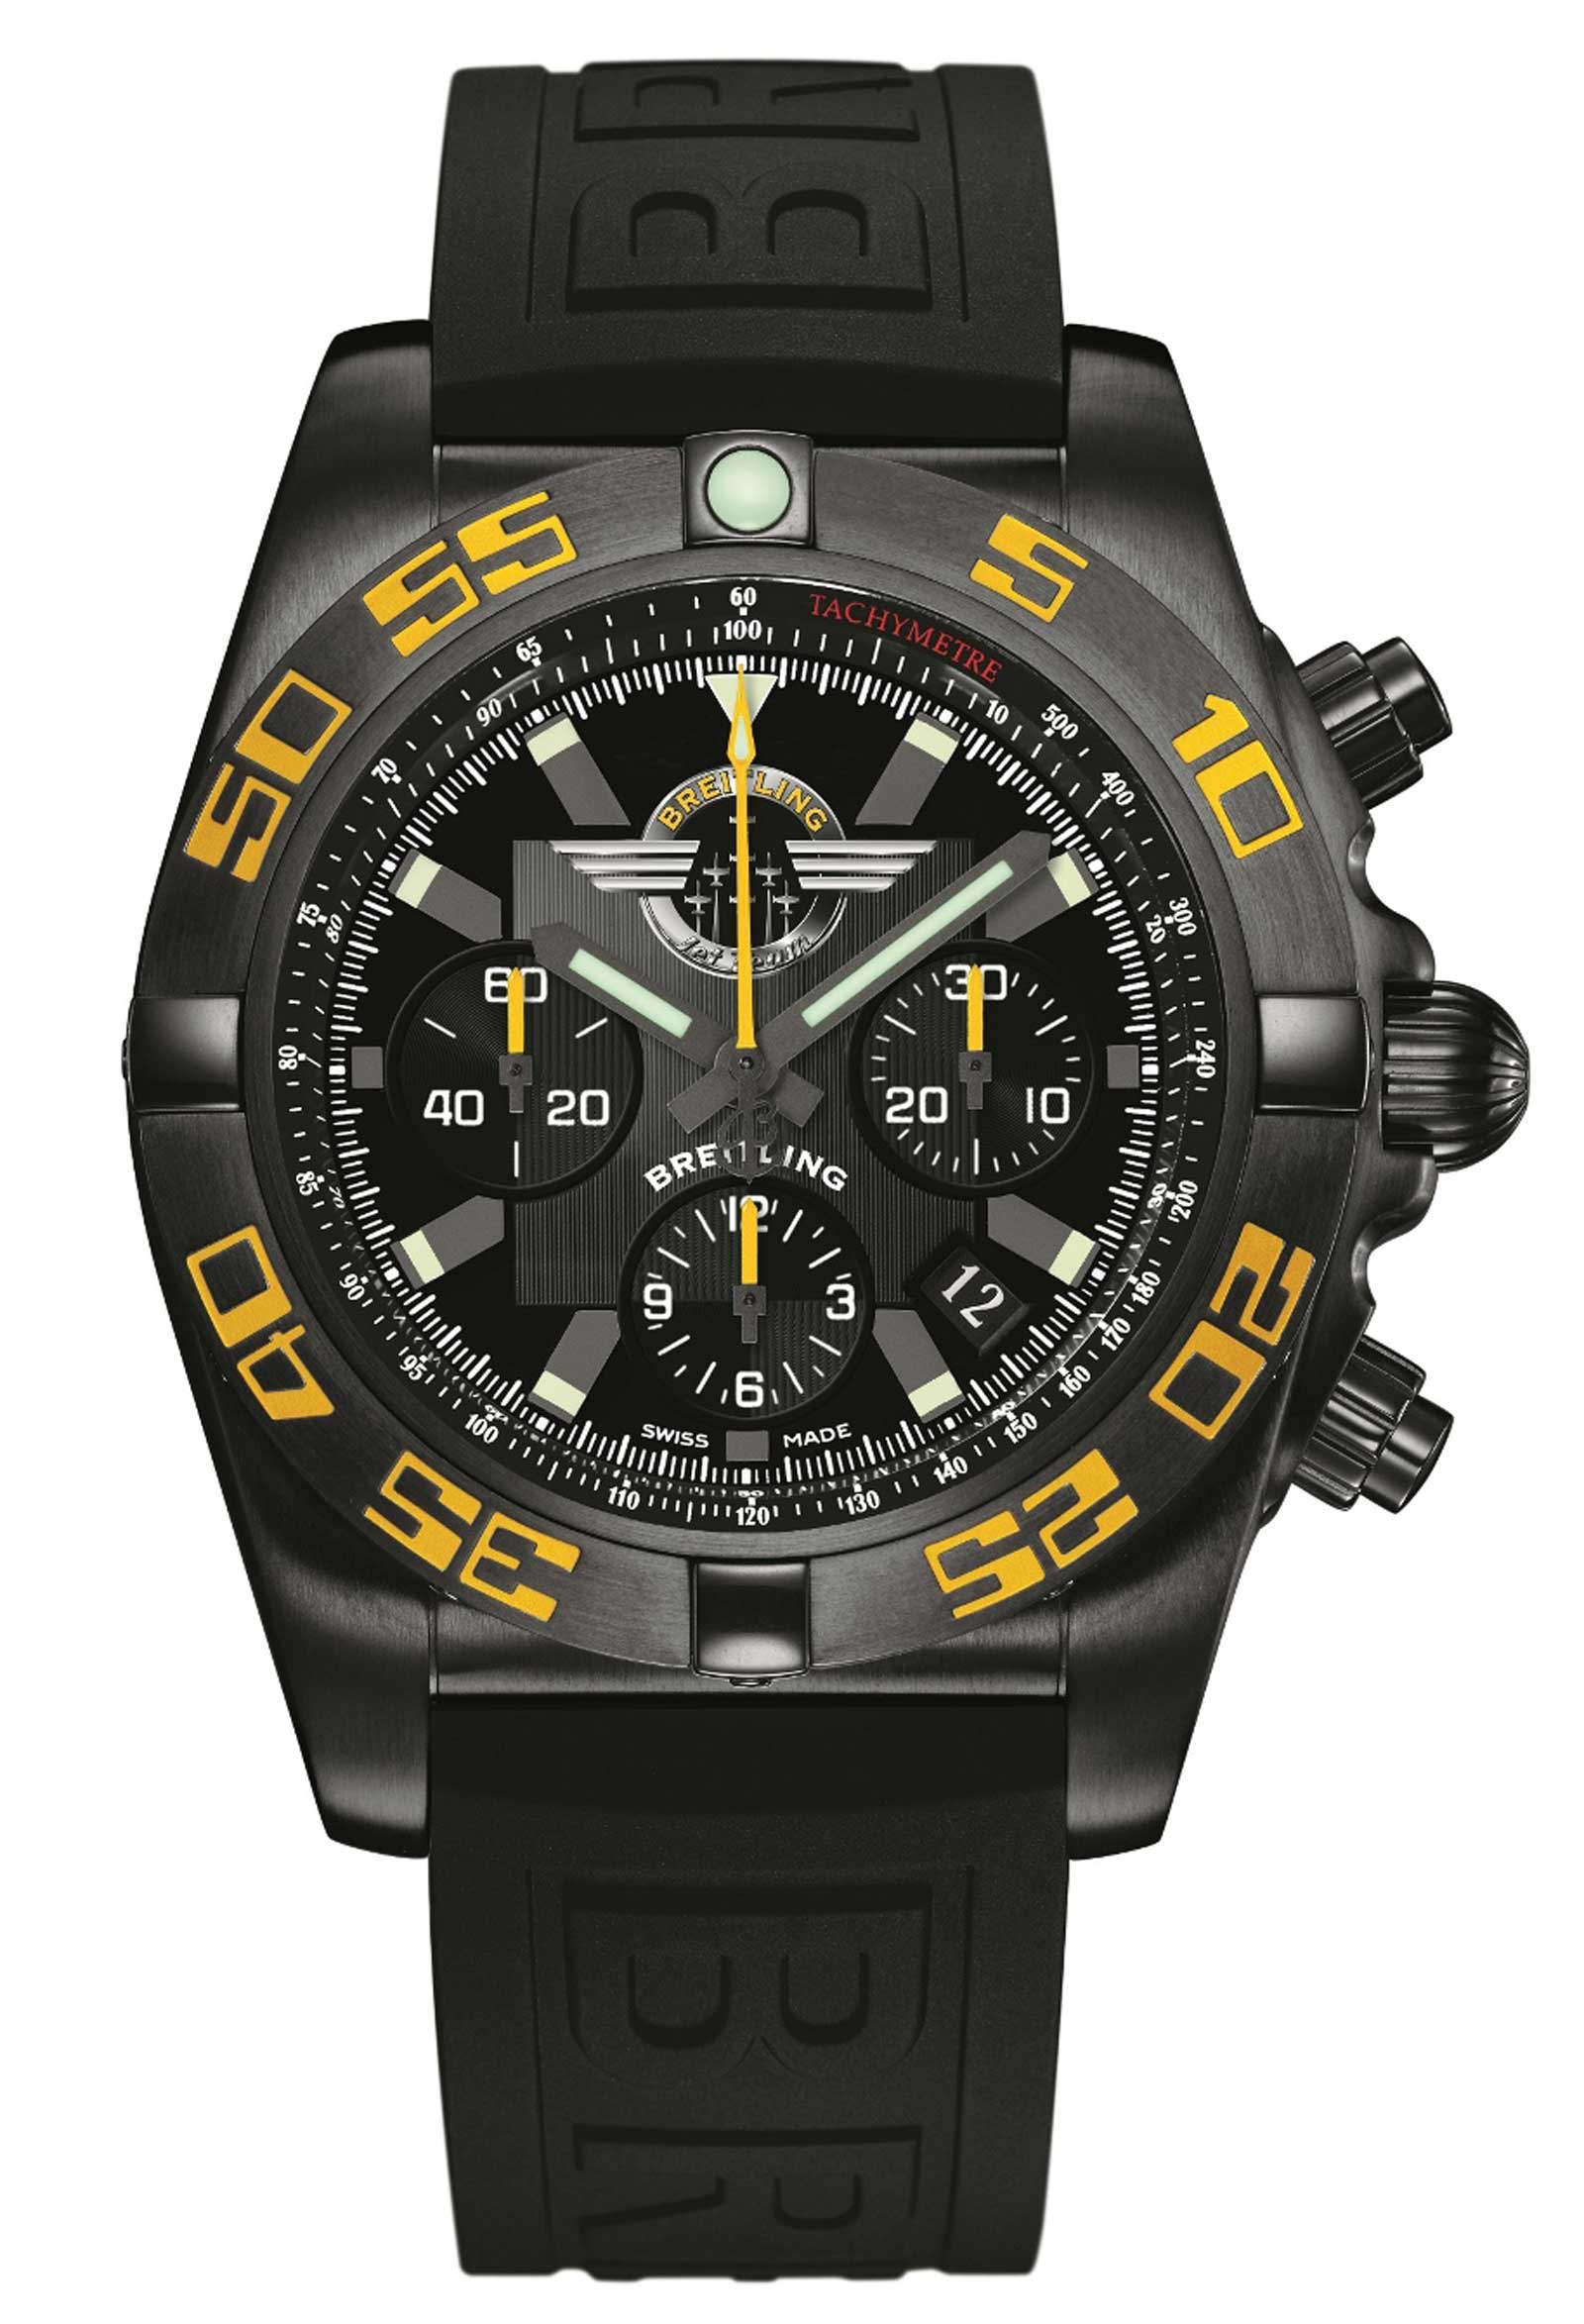 Bentley and Breitling Jet Team Series Chronograph